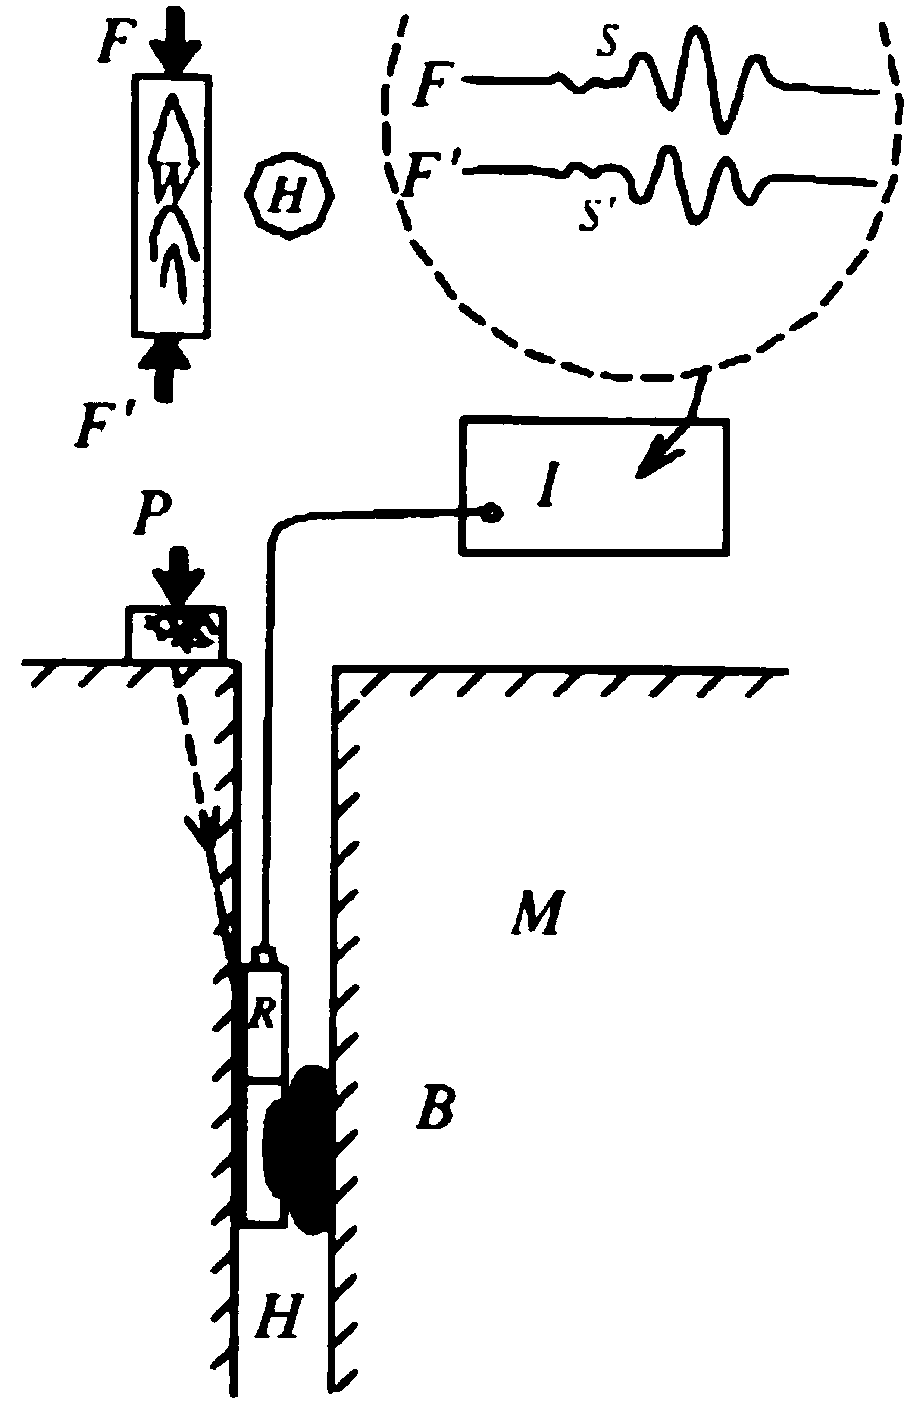 A Method for Stability Evaluation of Surrounding Rock of Tunnel Crossing Goaf